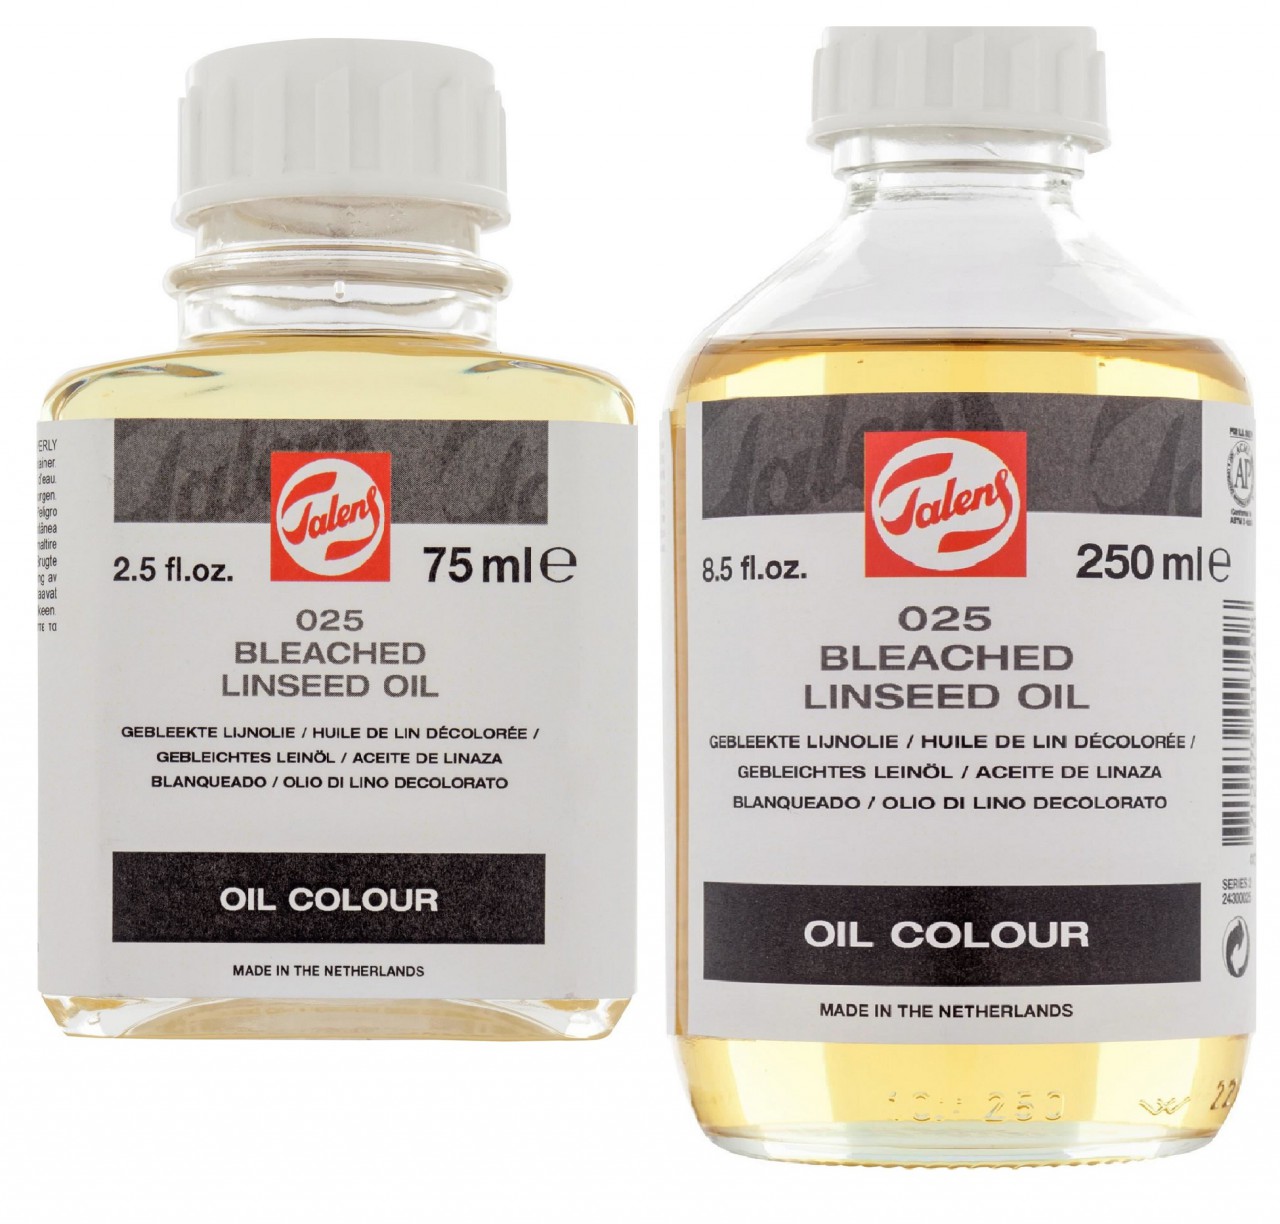 TALENS BLEACHED LINSEED OIL 75ml, 025